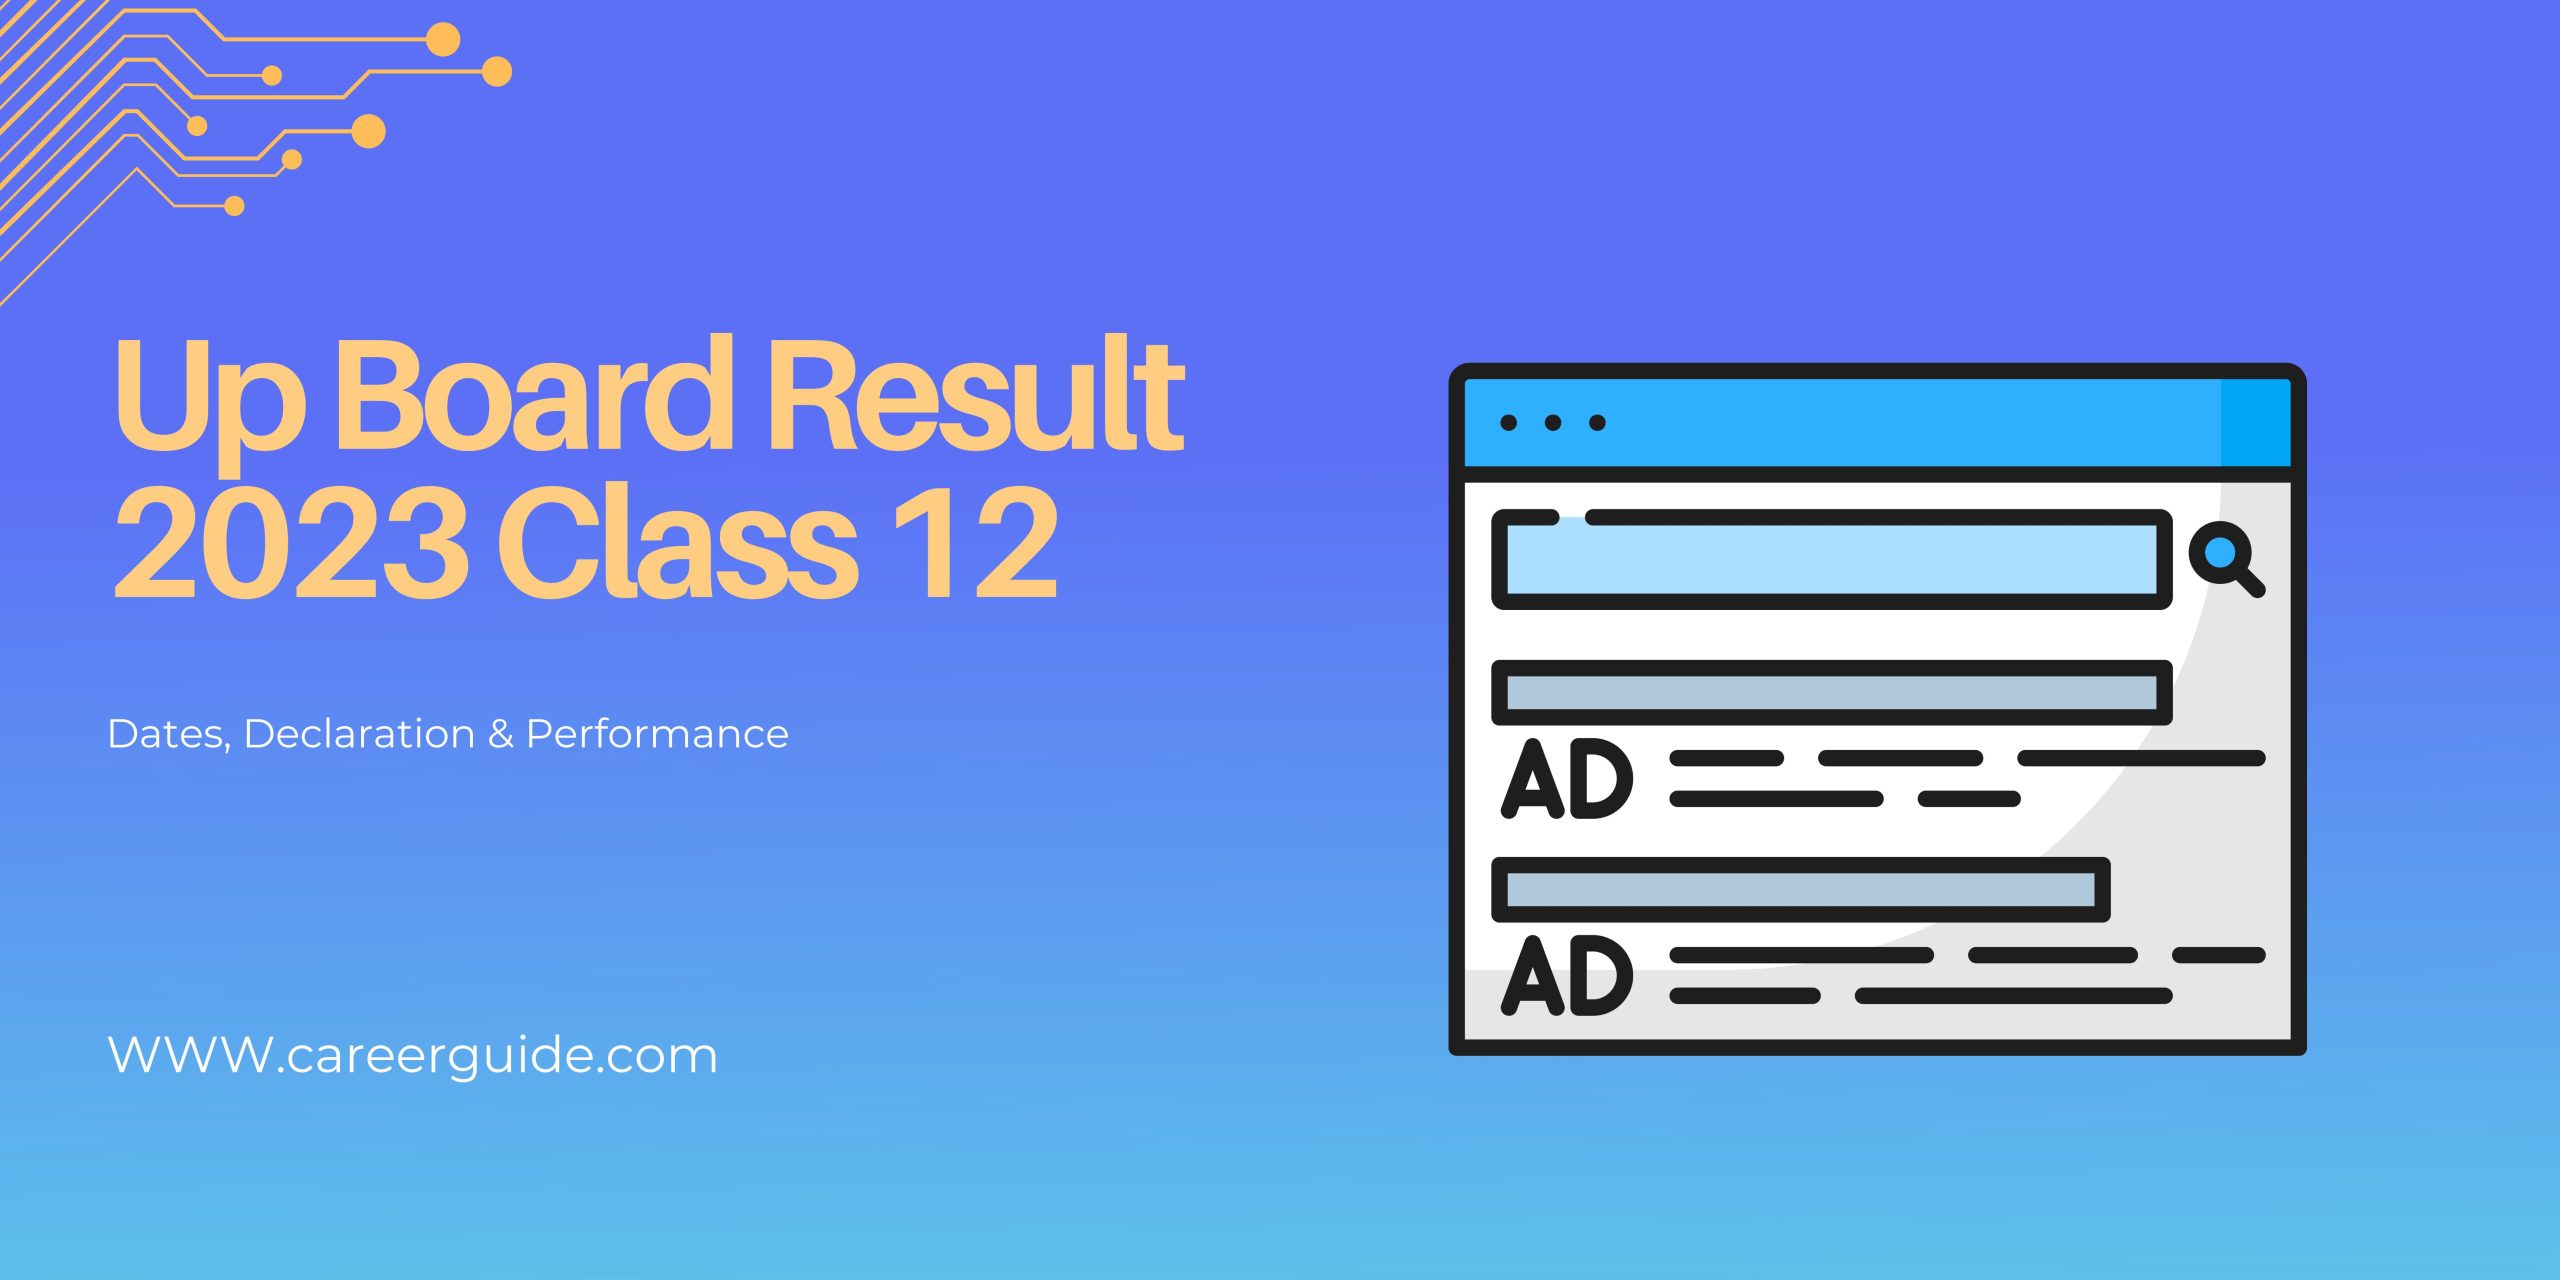 Up Board Result 2023 Class 12